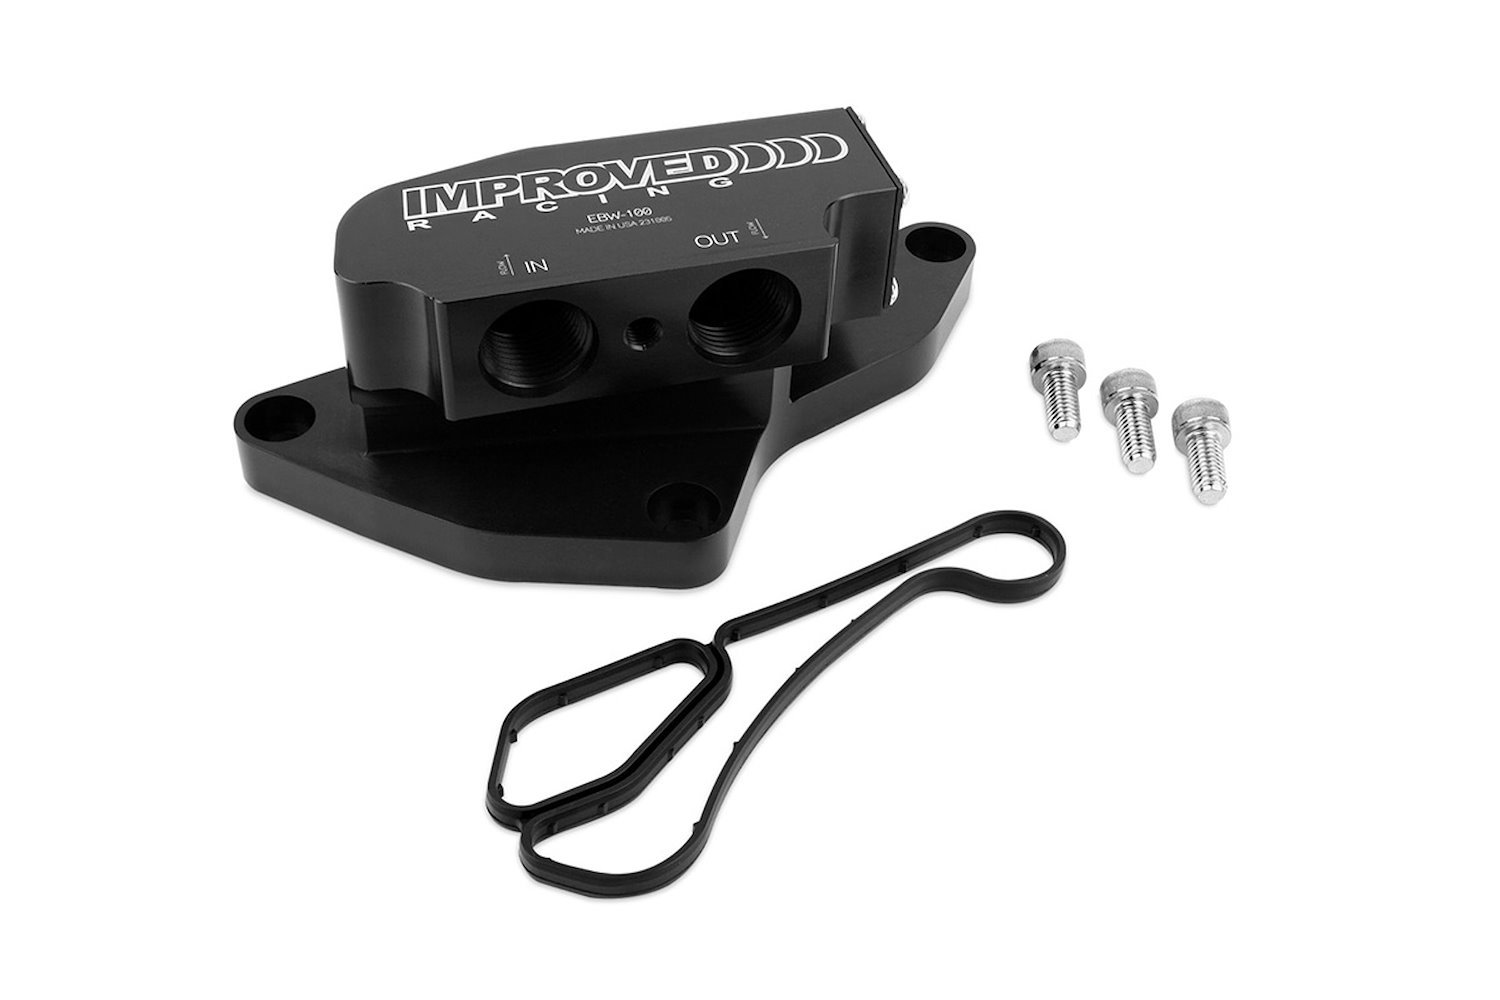 EBW-100-T6 Oil Cooler Adapter For BMW Engines, 200-degrees F Thermostat